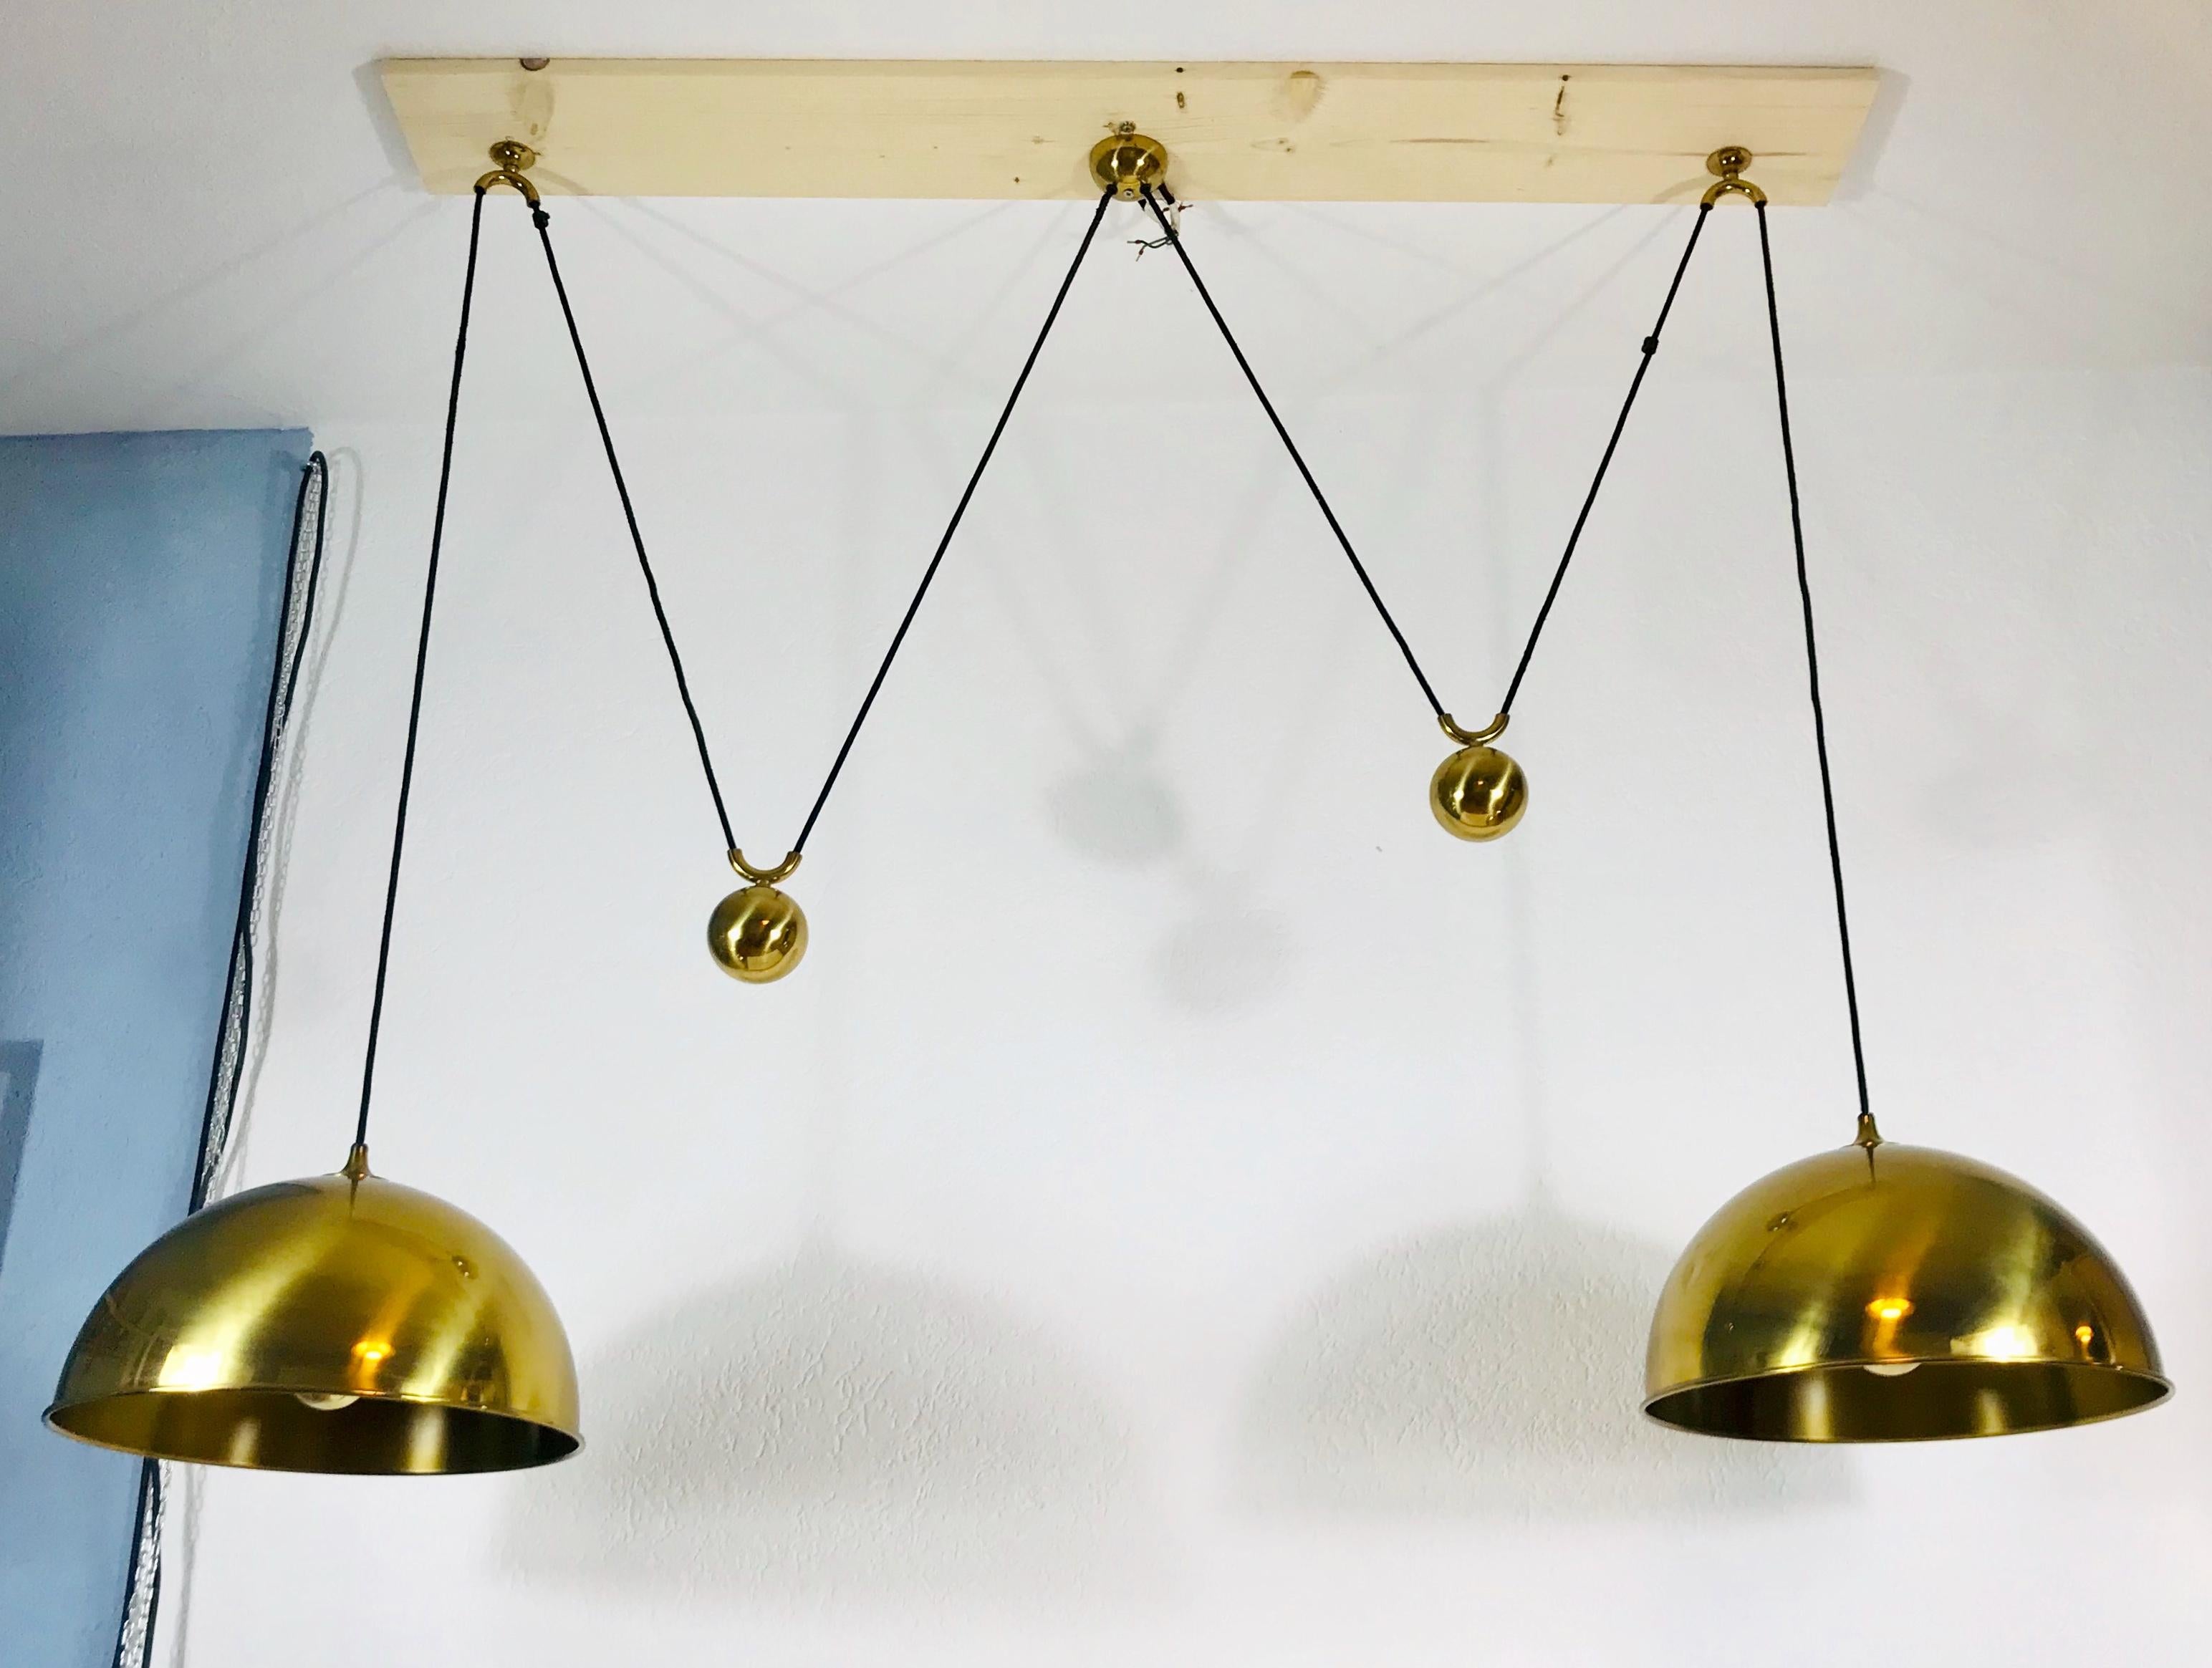 Counter balance pendants designed by Florian Schulz and made in Germany in the 1960s. It is fascinating with its exclusive design and two polished brass pendants. The height of the lighting is adjustable.

Measurements of one shade:
Height 25